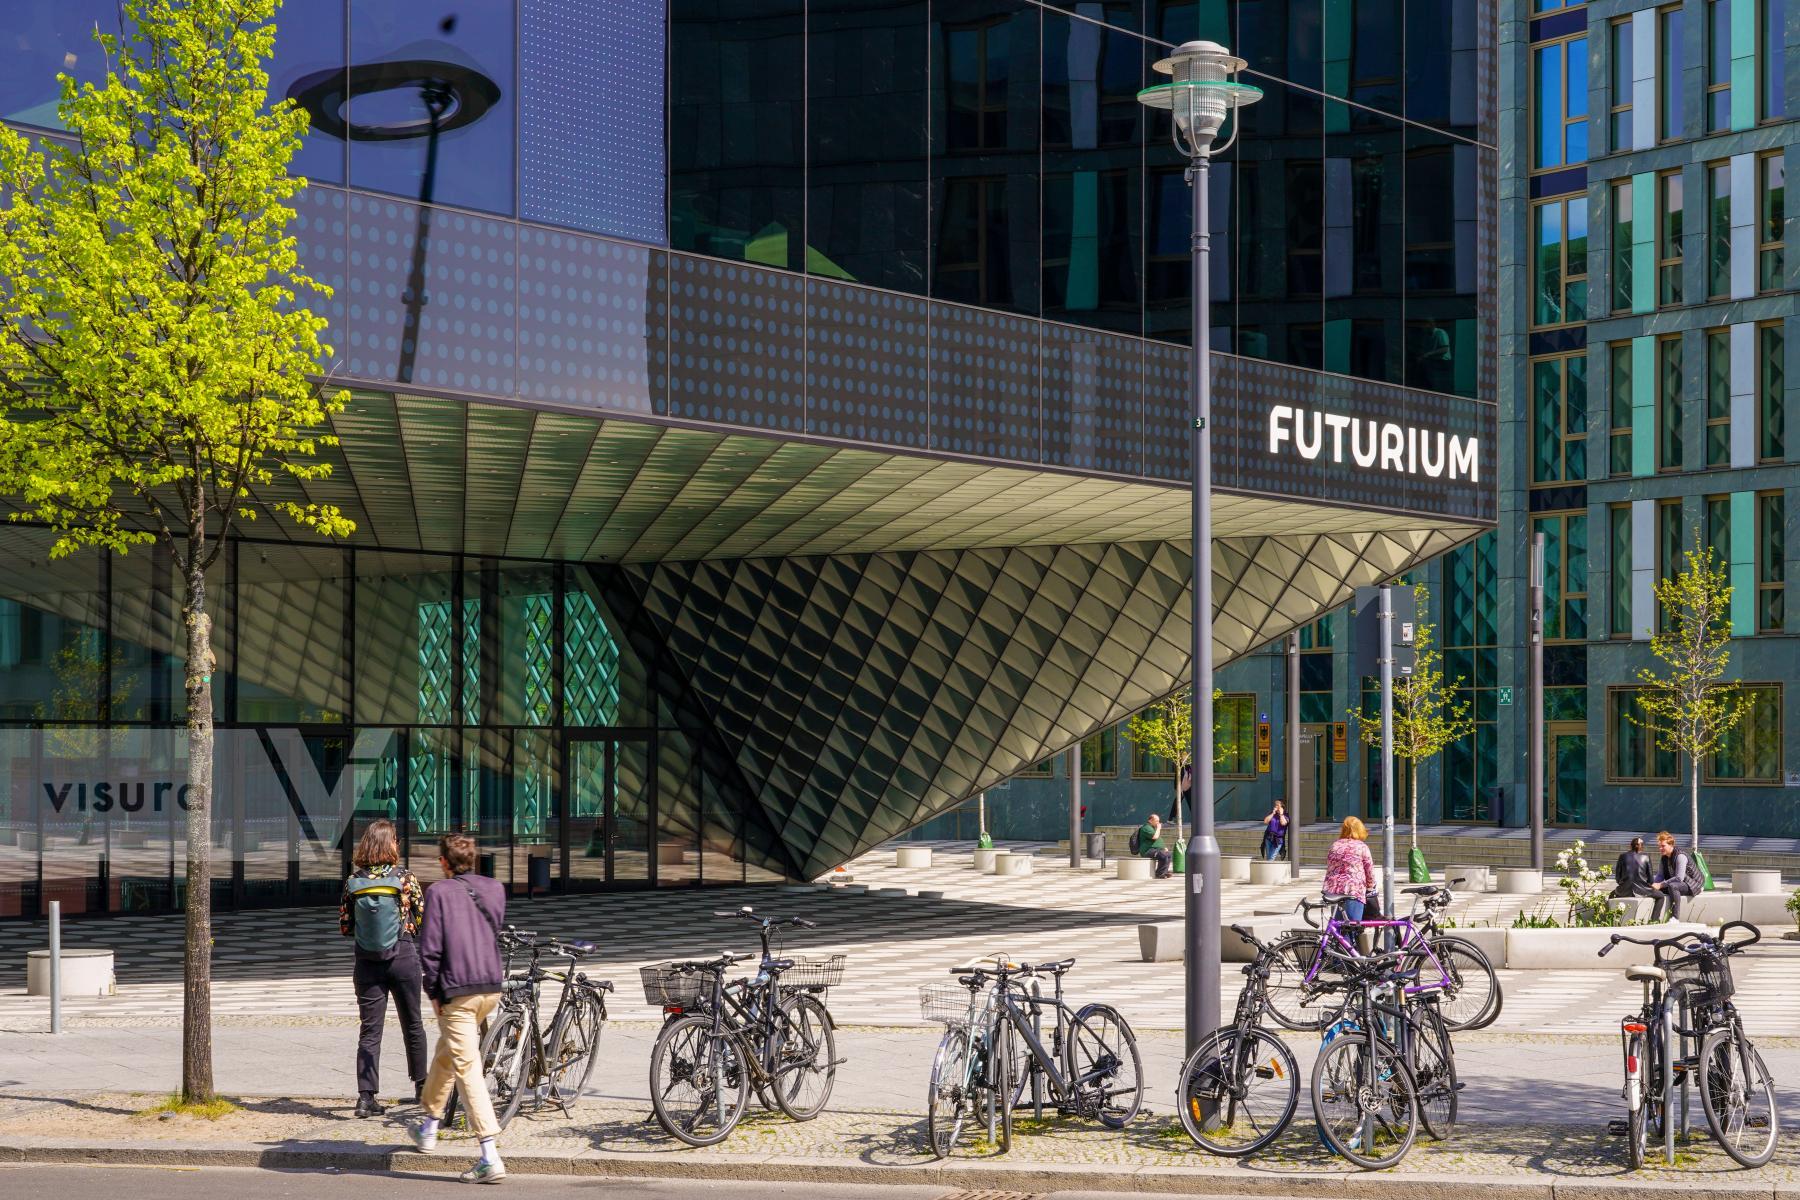 Purchase The Futurium in Berlin by Michael Nguyen